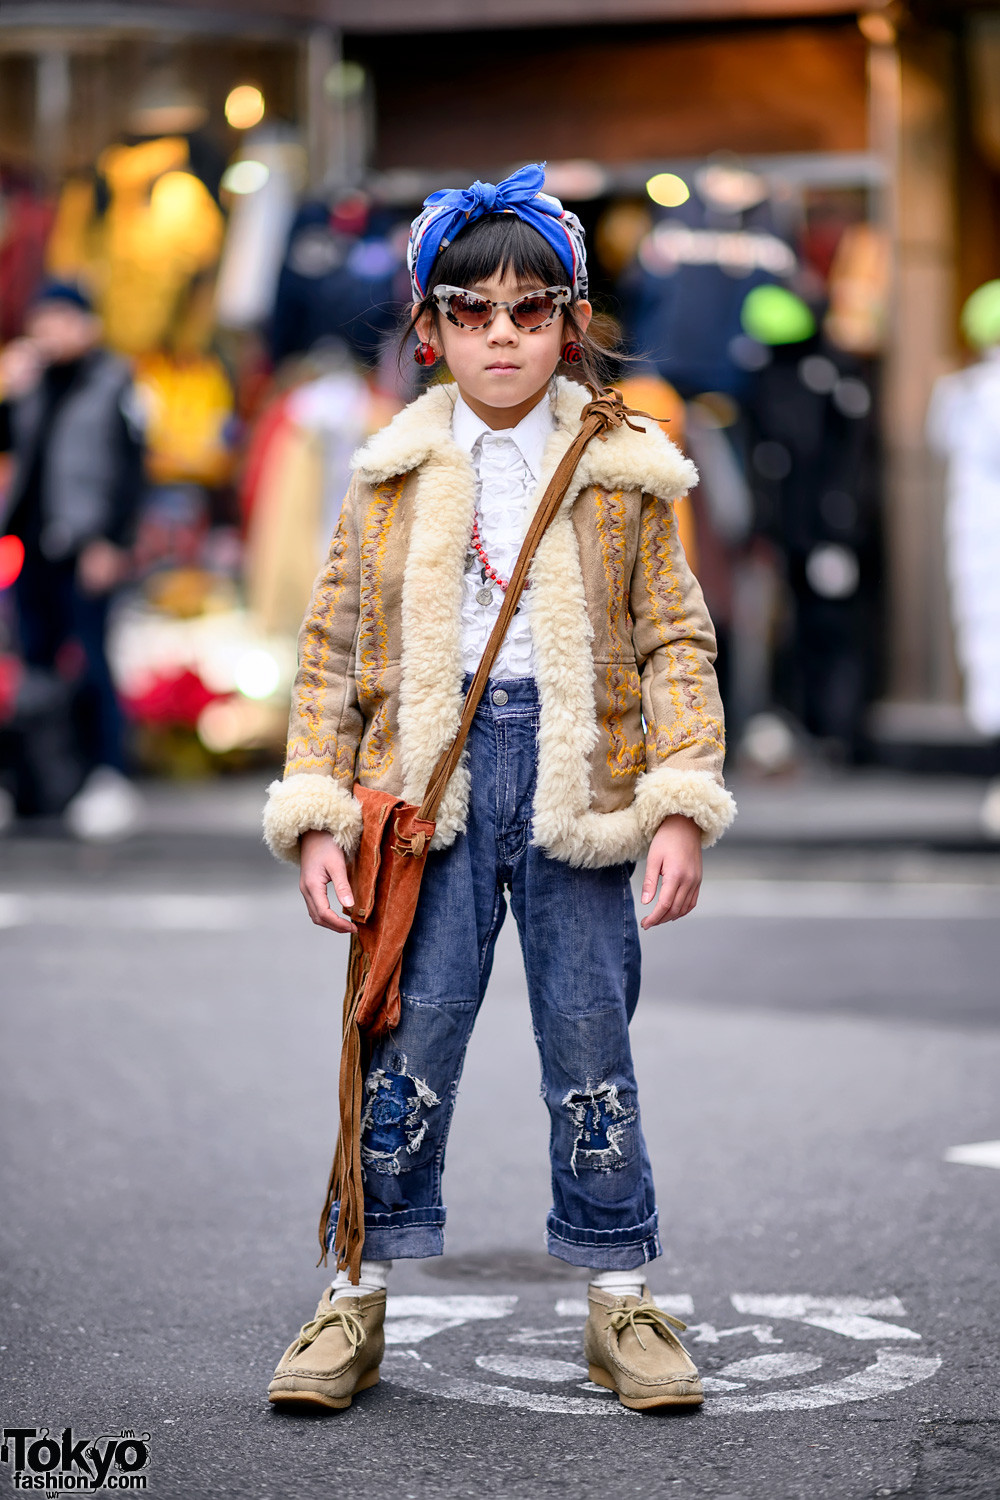 Japan Kids Fashion
 6 Year Old Harajuku Girl in 1950s and 1970s Vintage Kids